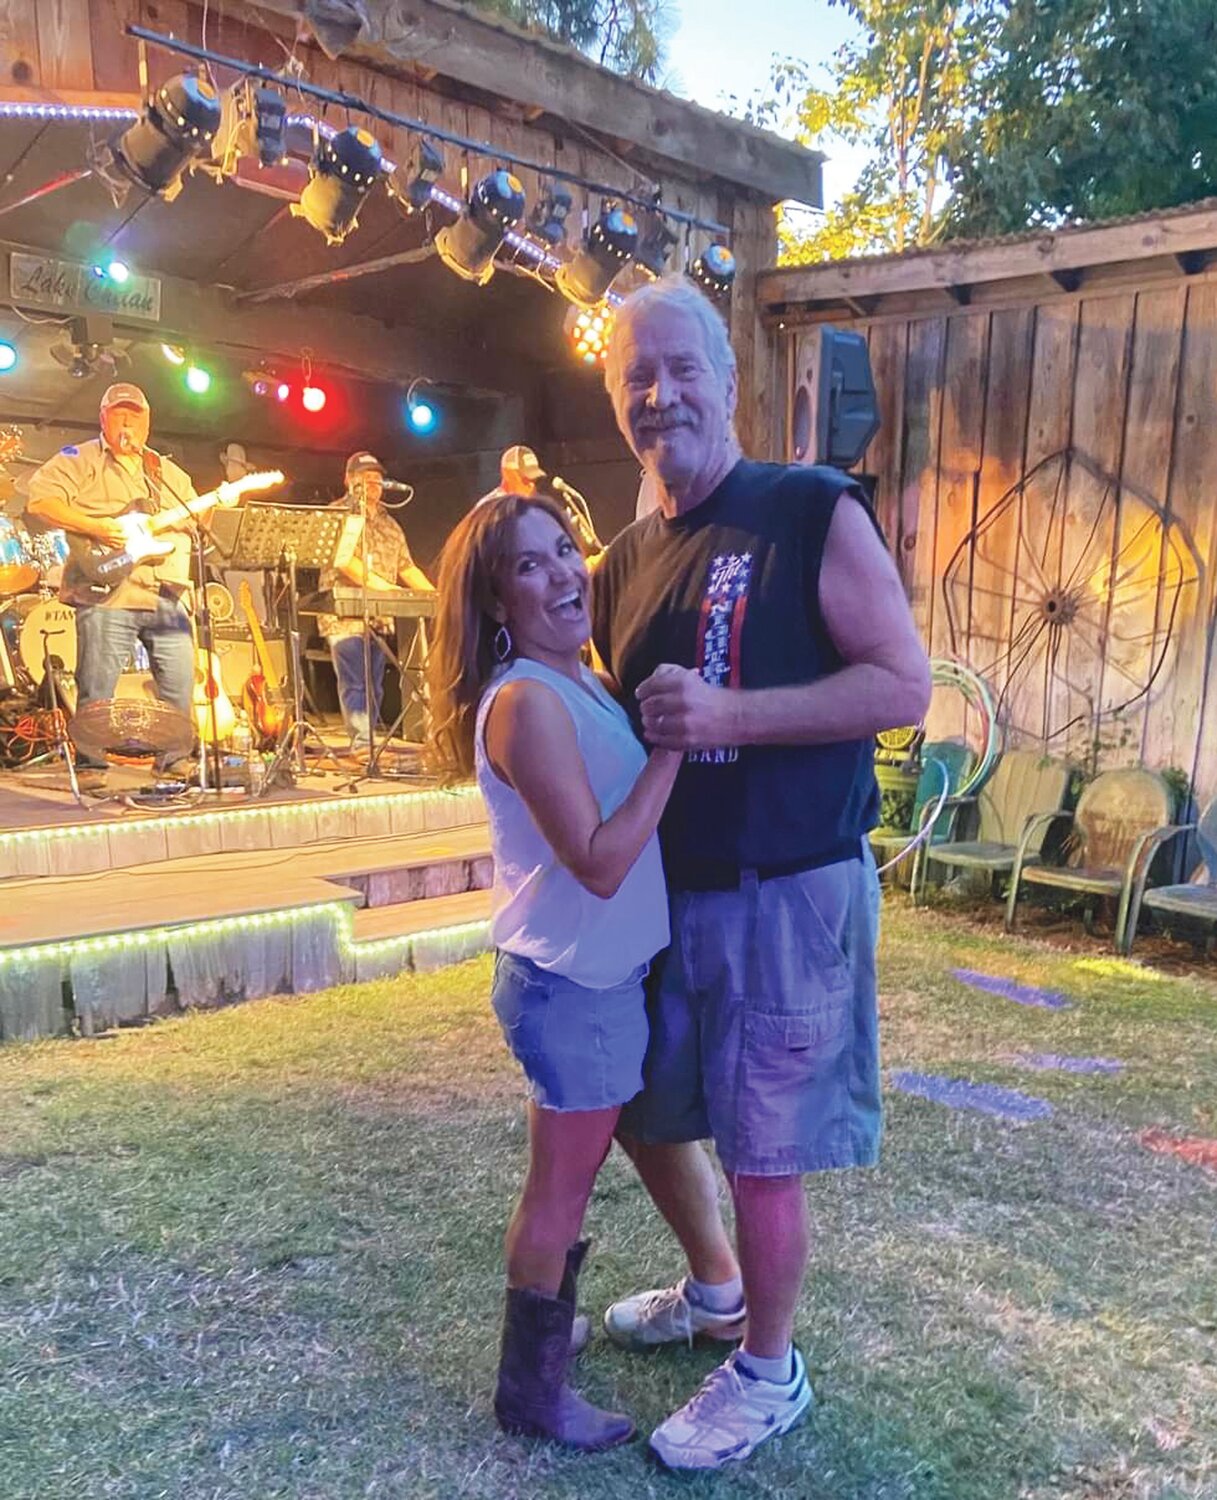 Bob Watson Jr. and his wife, Socco, played host to the 23rd Annual Barn Stomp, a cherished tradition that had humble beginnings as a small family potluck gathering at Watson’s Shadow Bay Belgians venue 23 years ago.
COURTESY OF WATSON’S SHADOW BAY BELGIANS